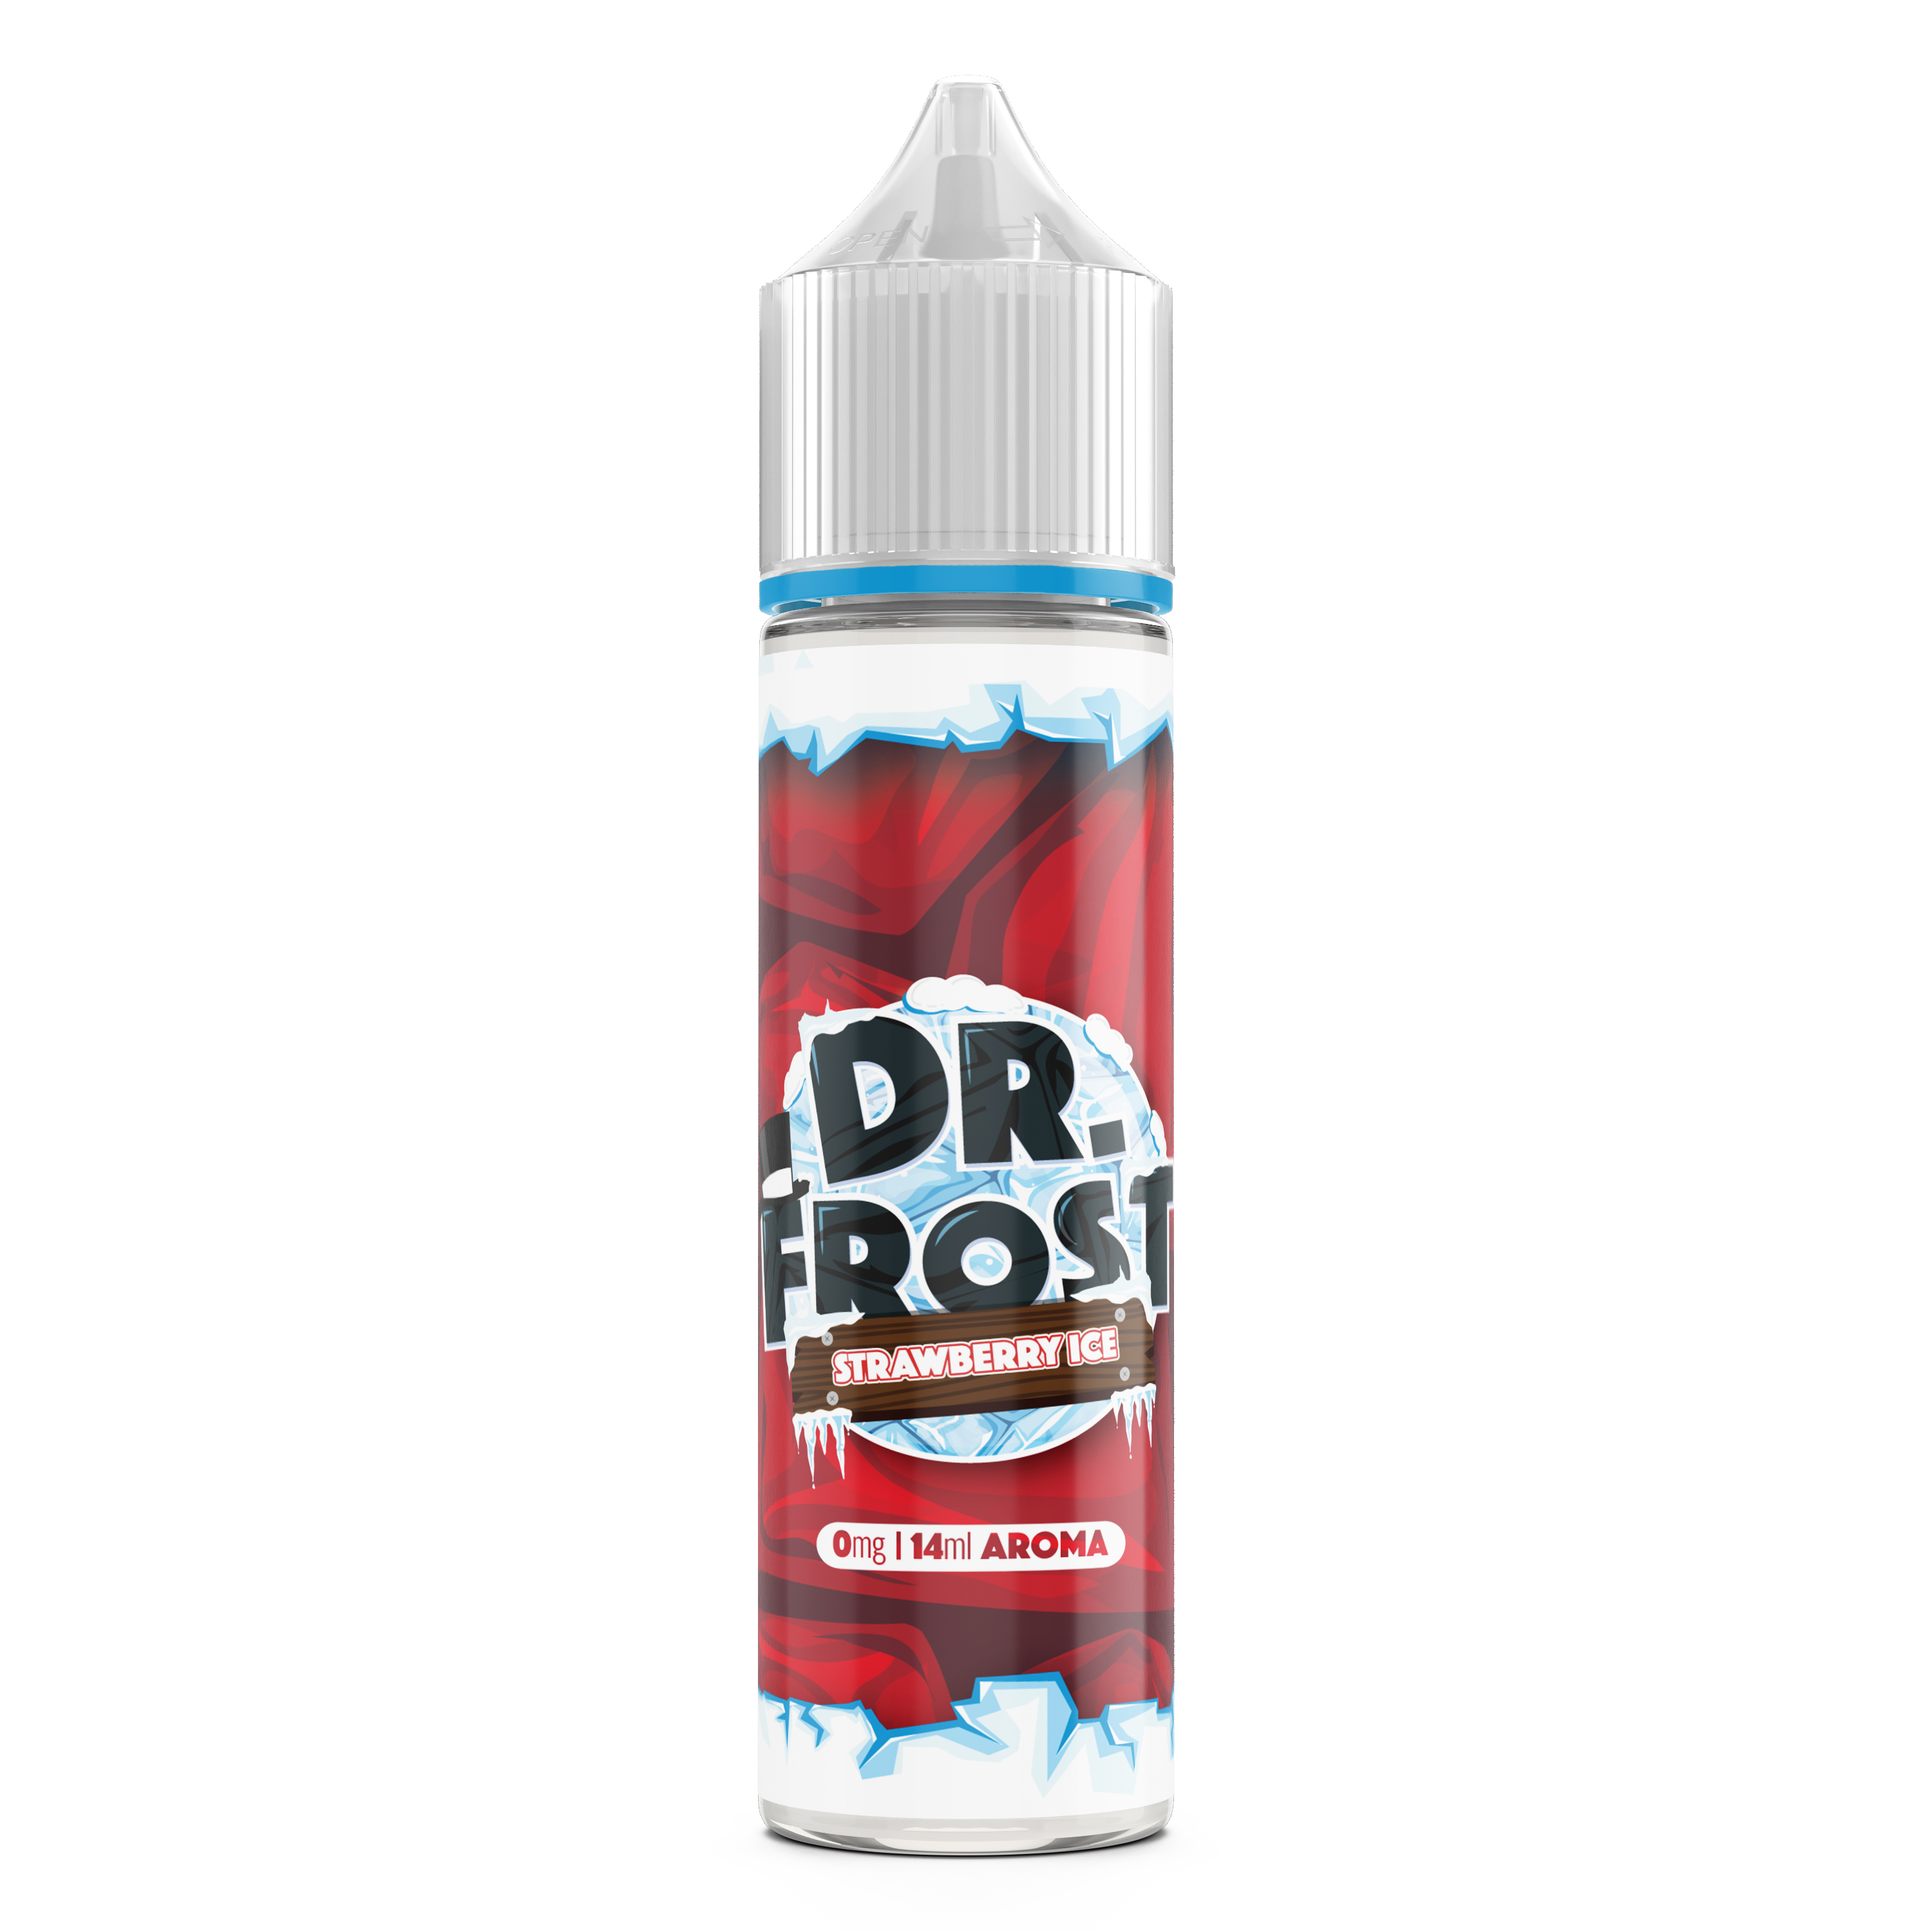 Dr. Frost - Strawberry Ice Longfill 14ml